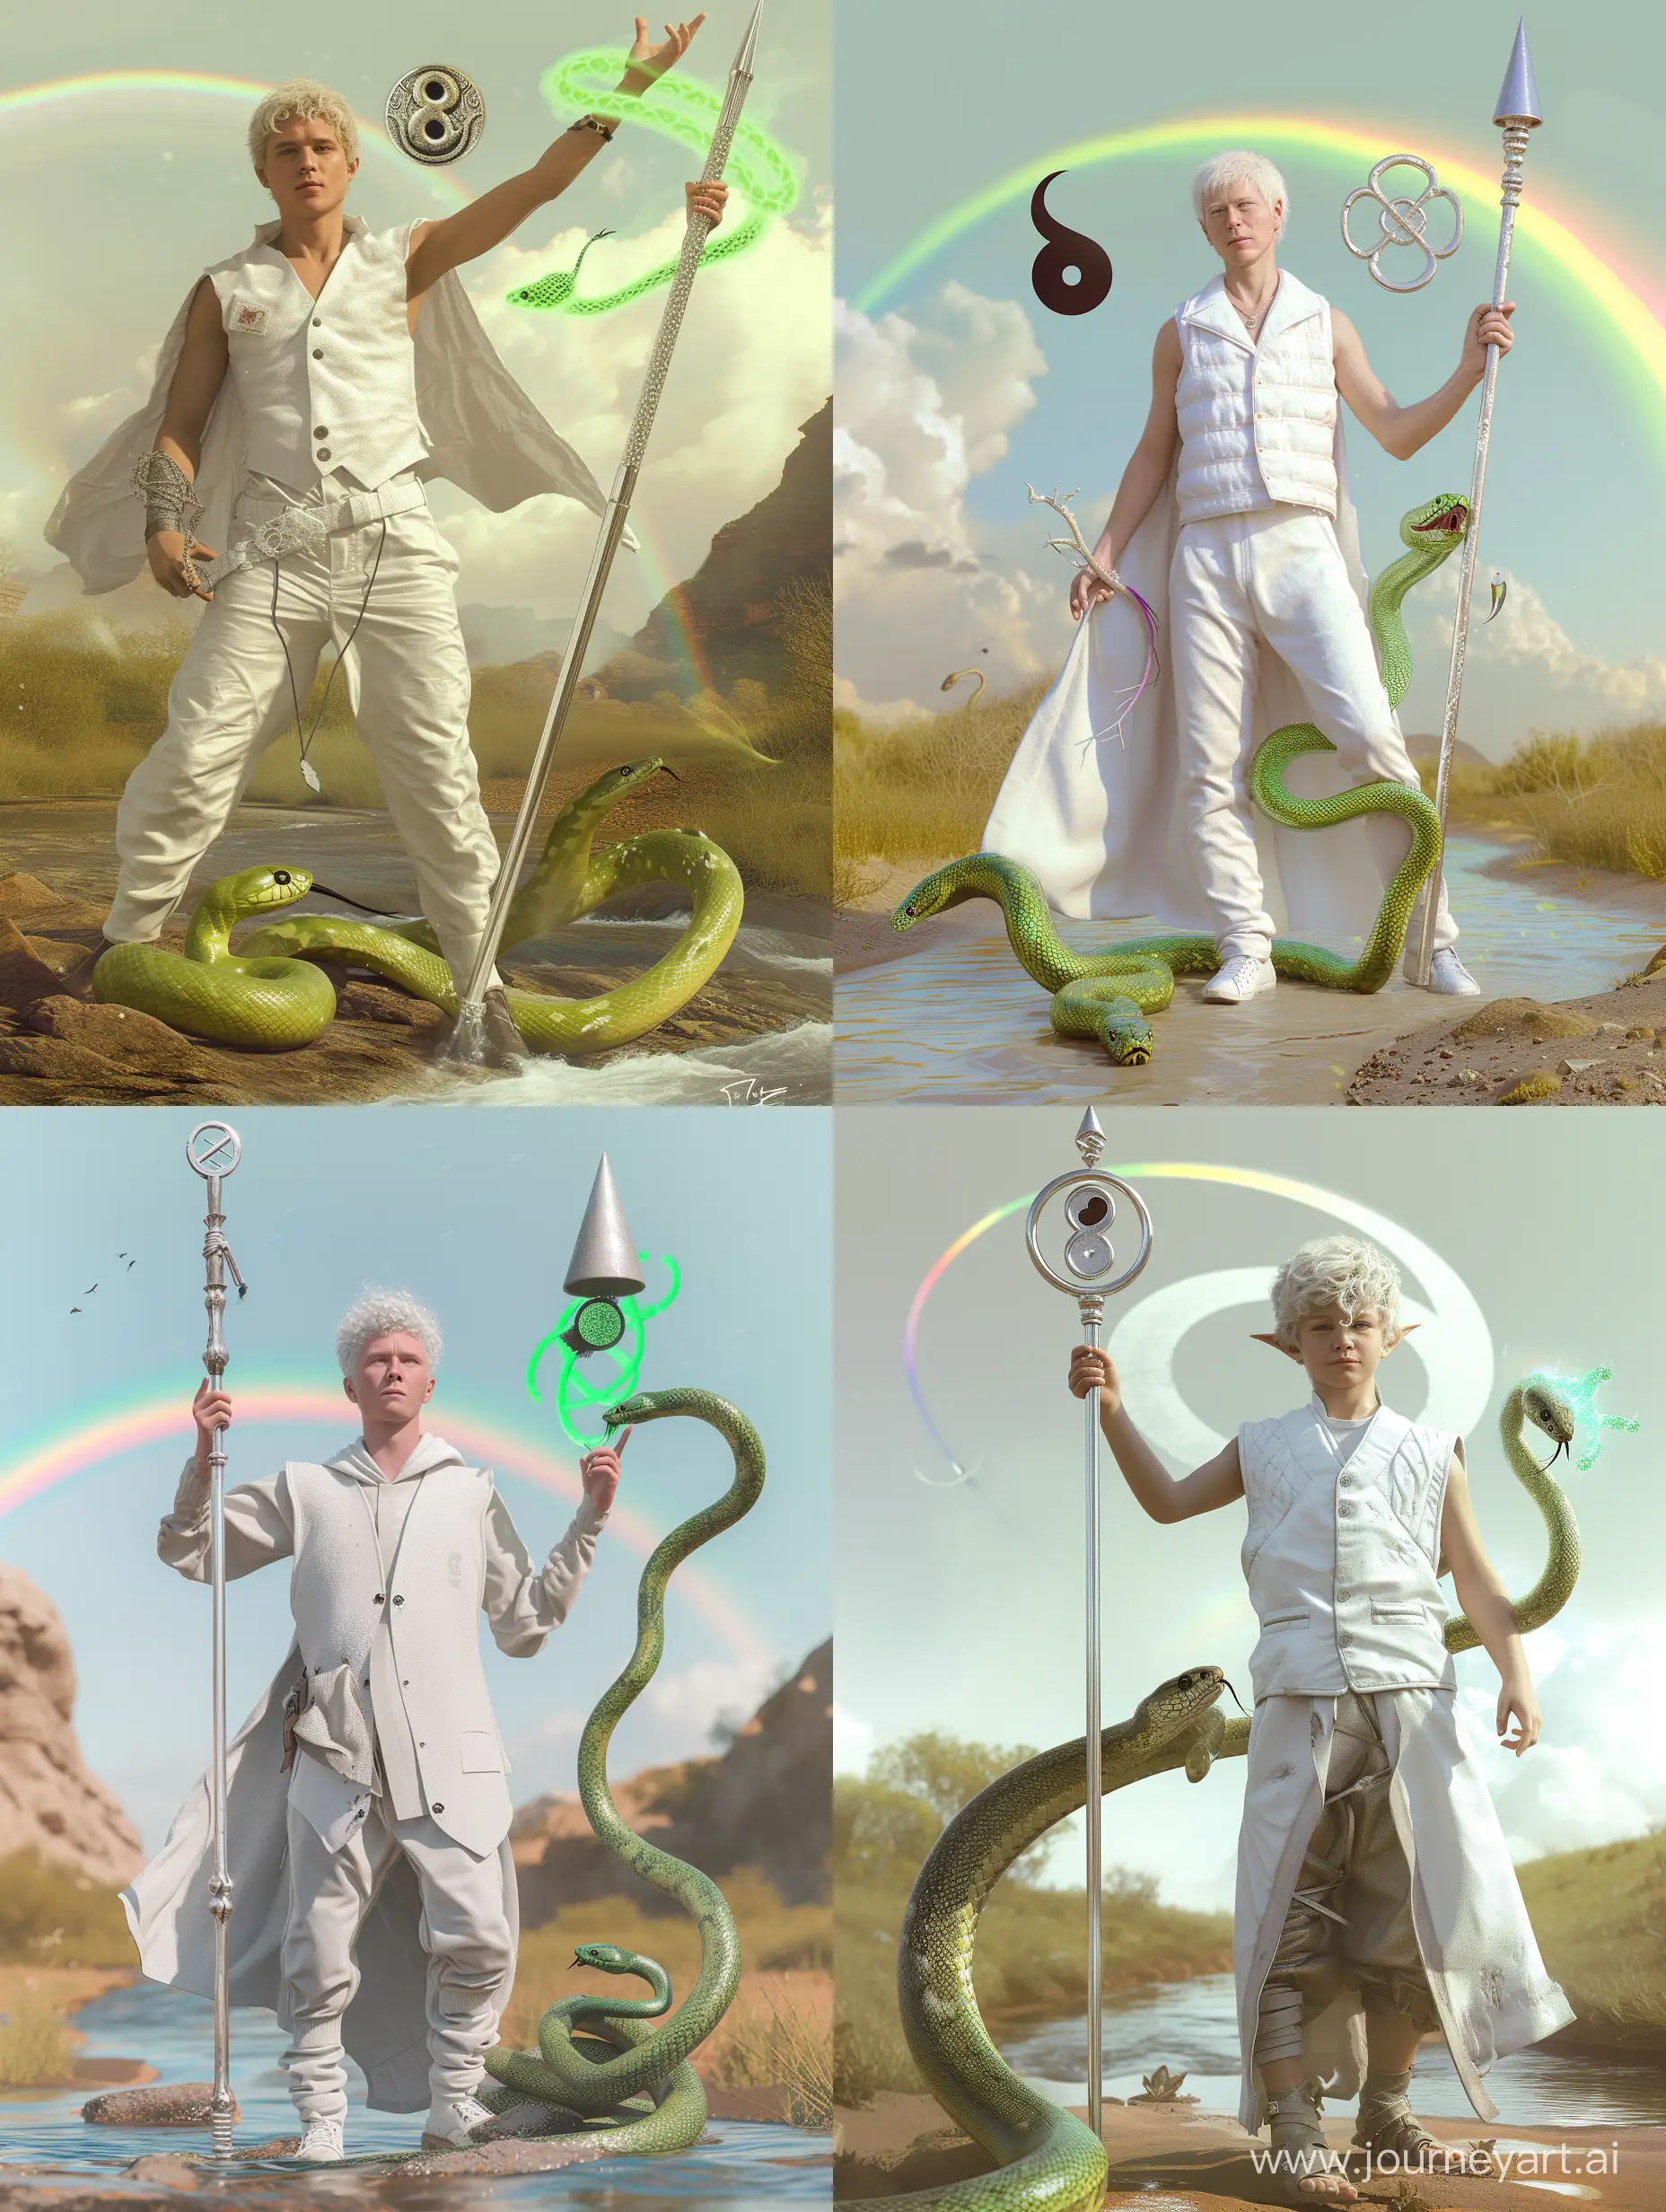 Enlightened-Wizard-Taming-Devilish-Energy-with-YinYang-Symbol-and-Neon-Snake